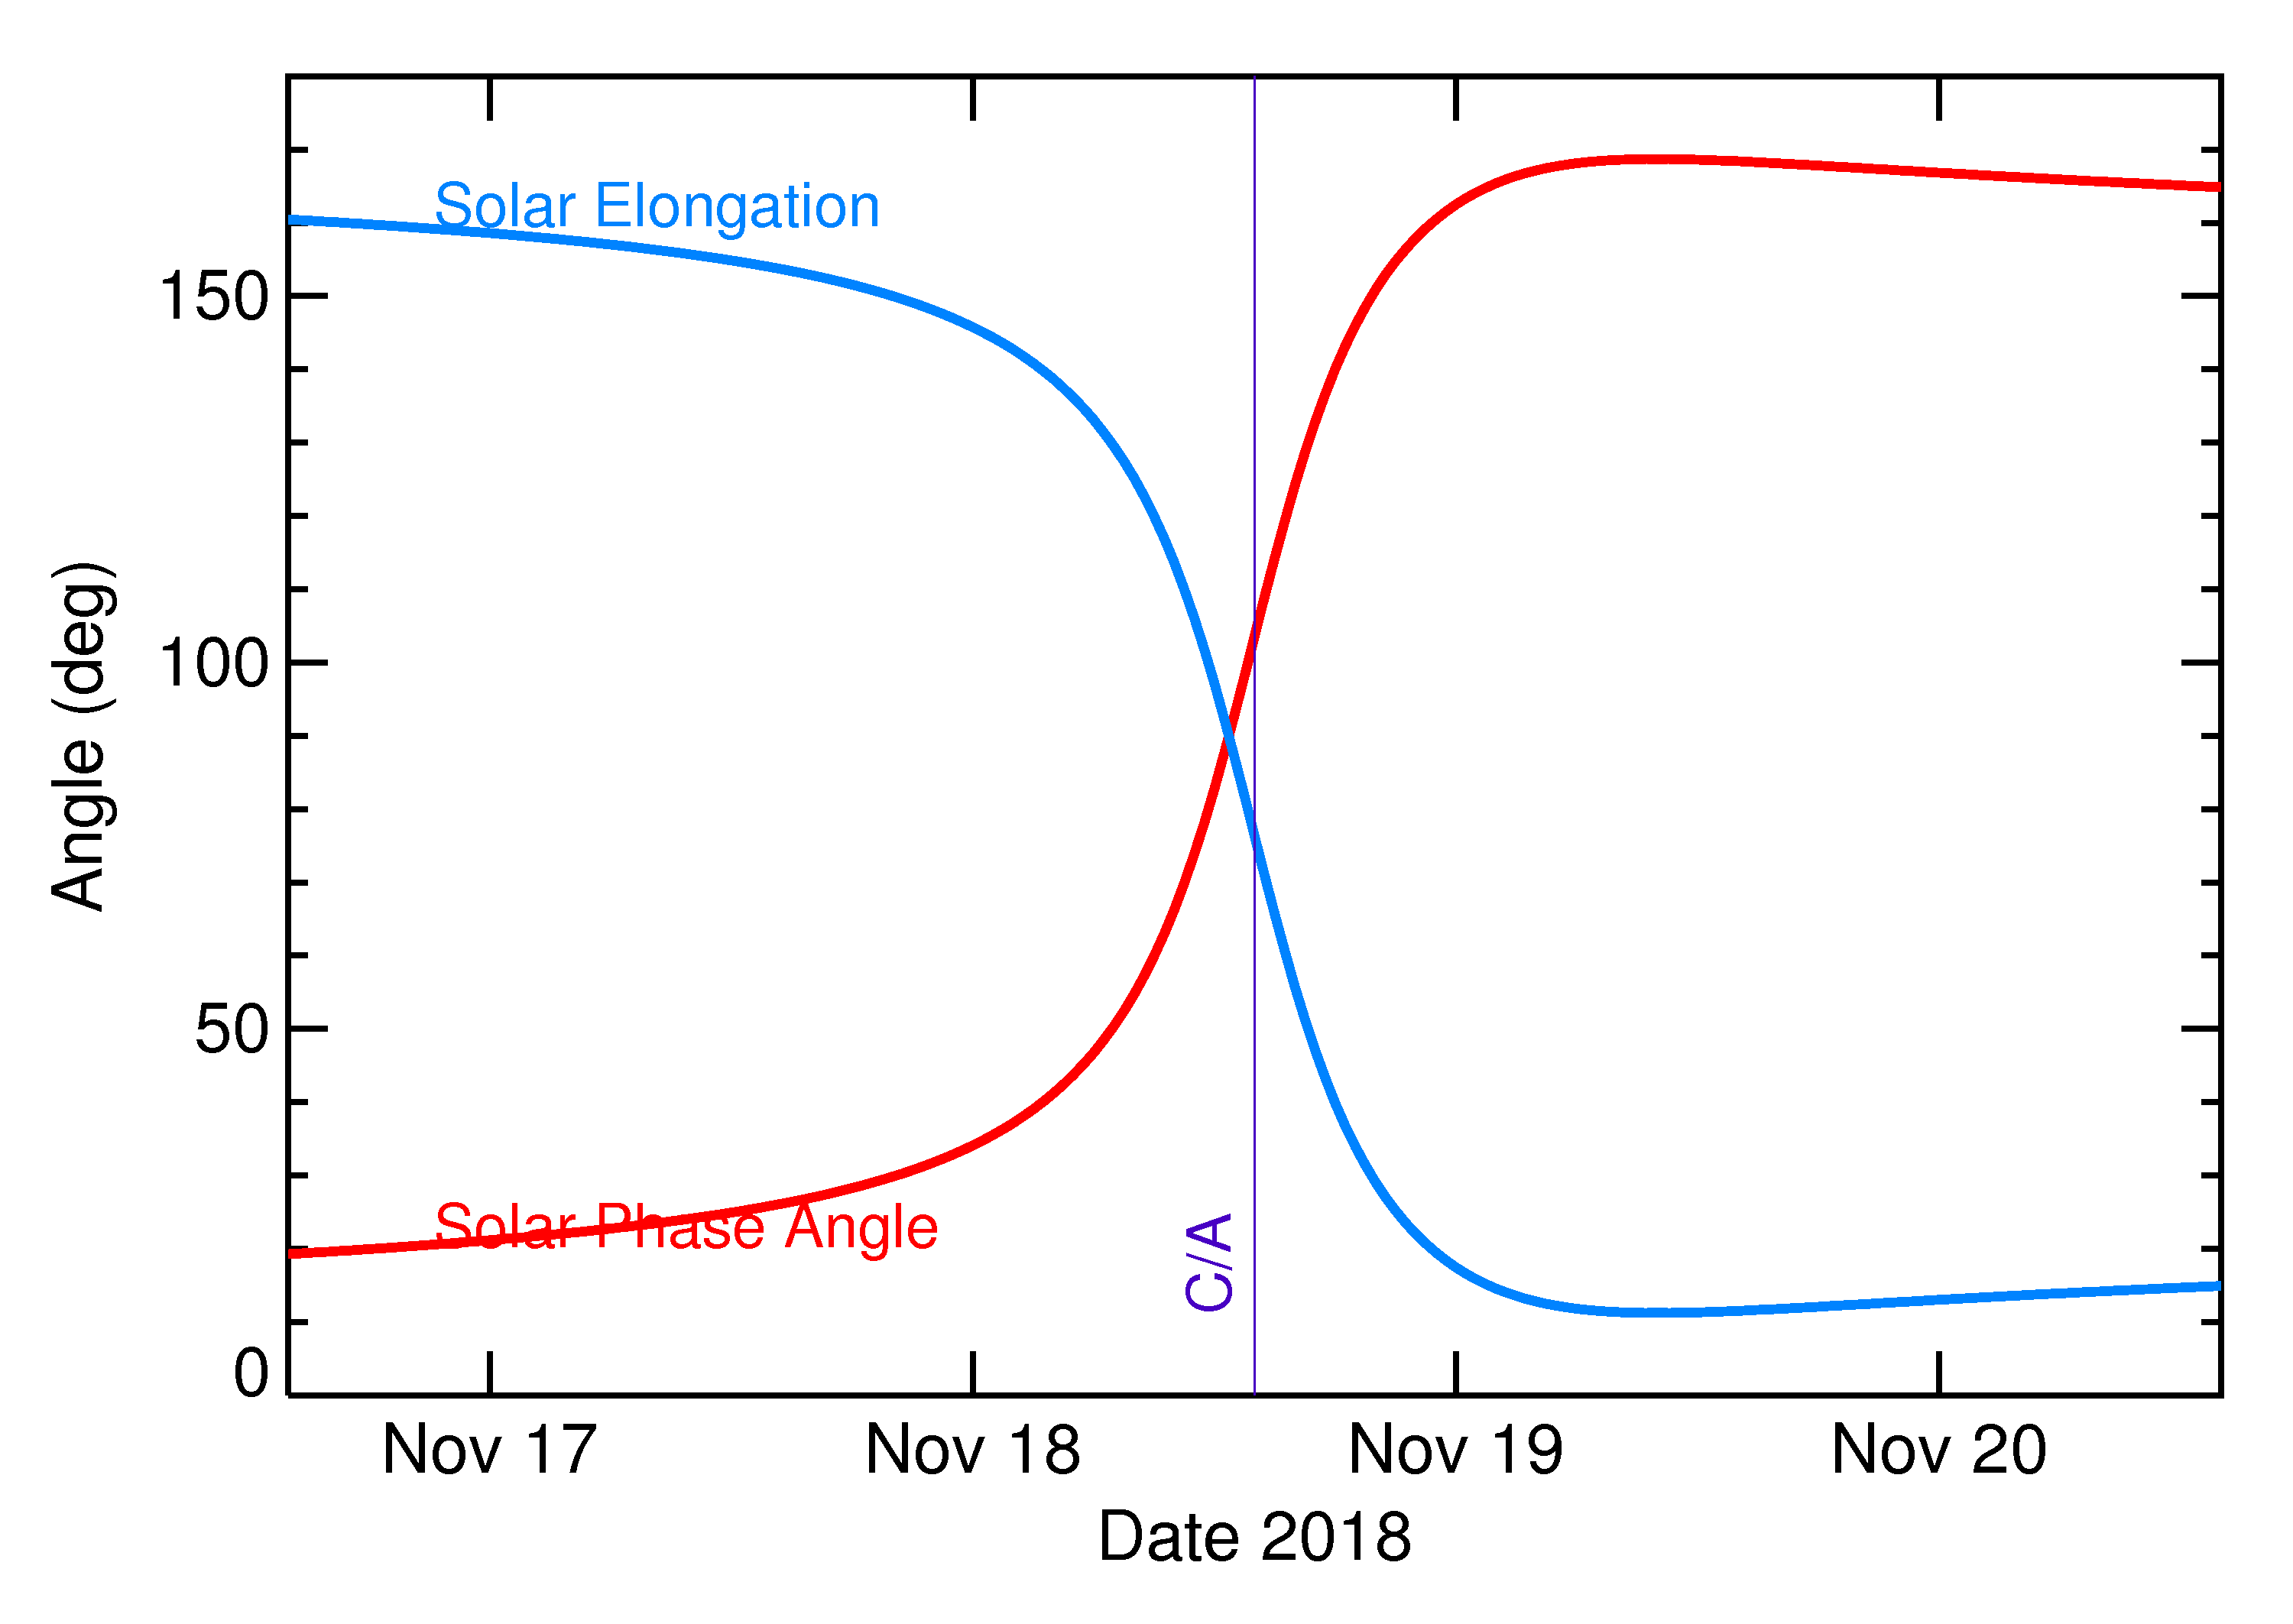 Solar Elongation and Solar Phase Angle of 2018 WE in the days around closest approach